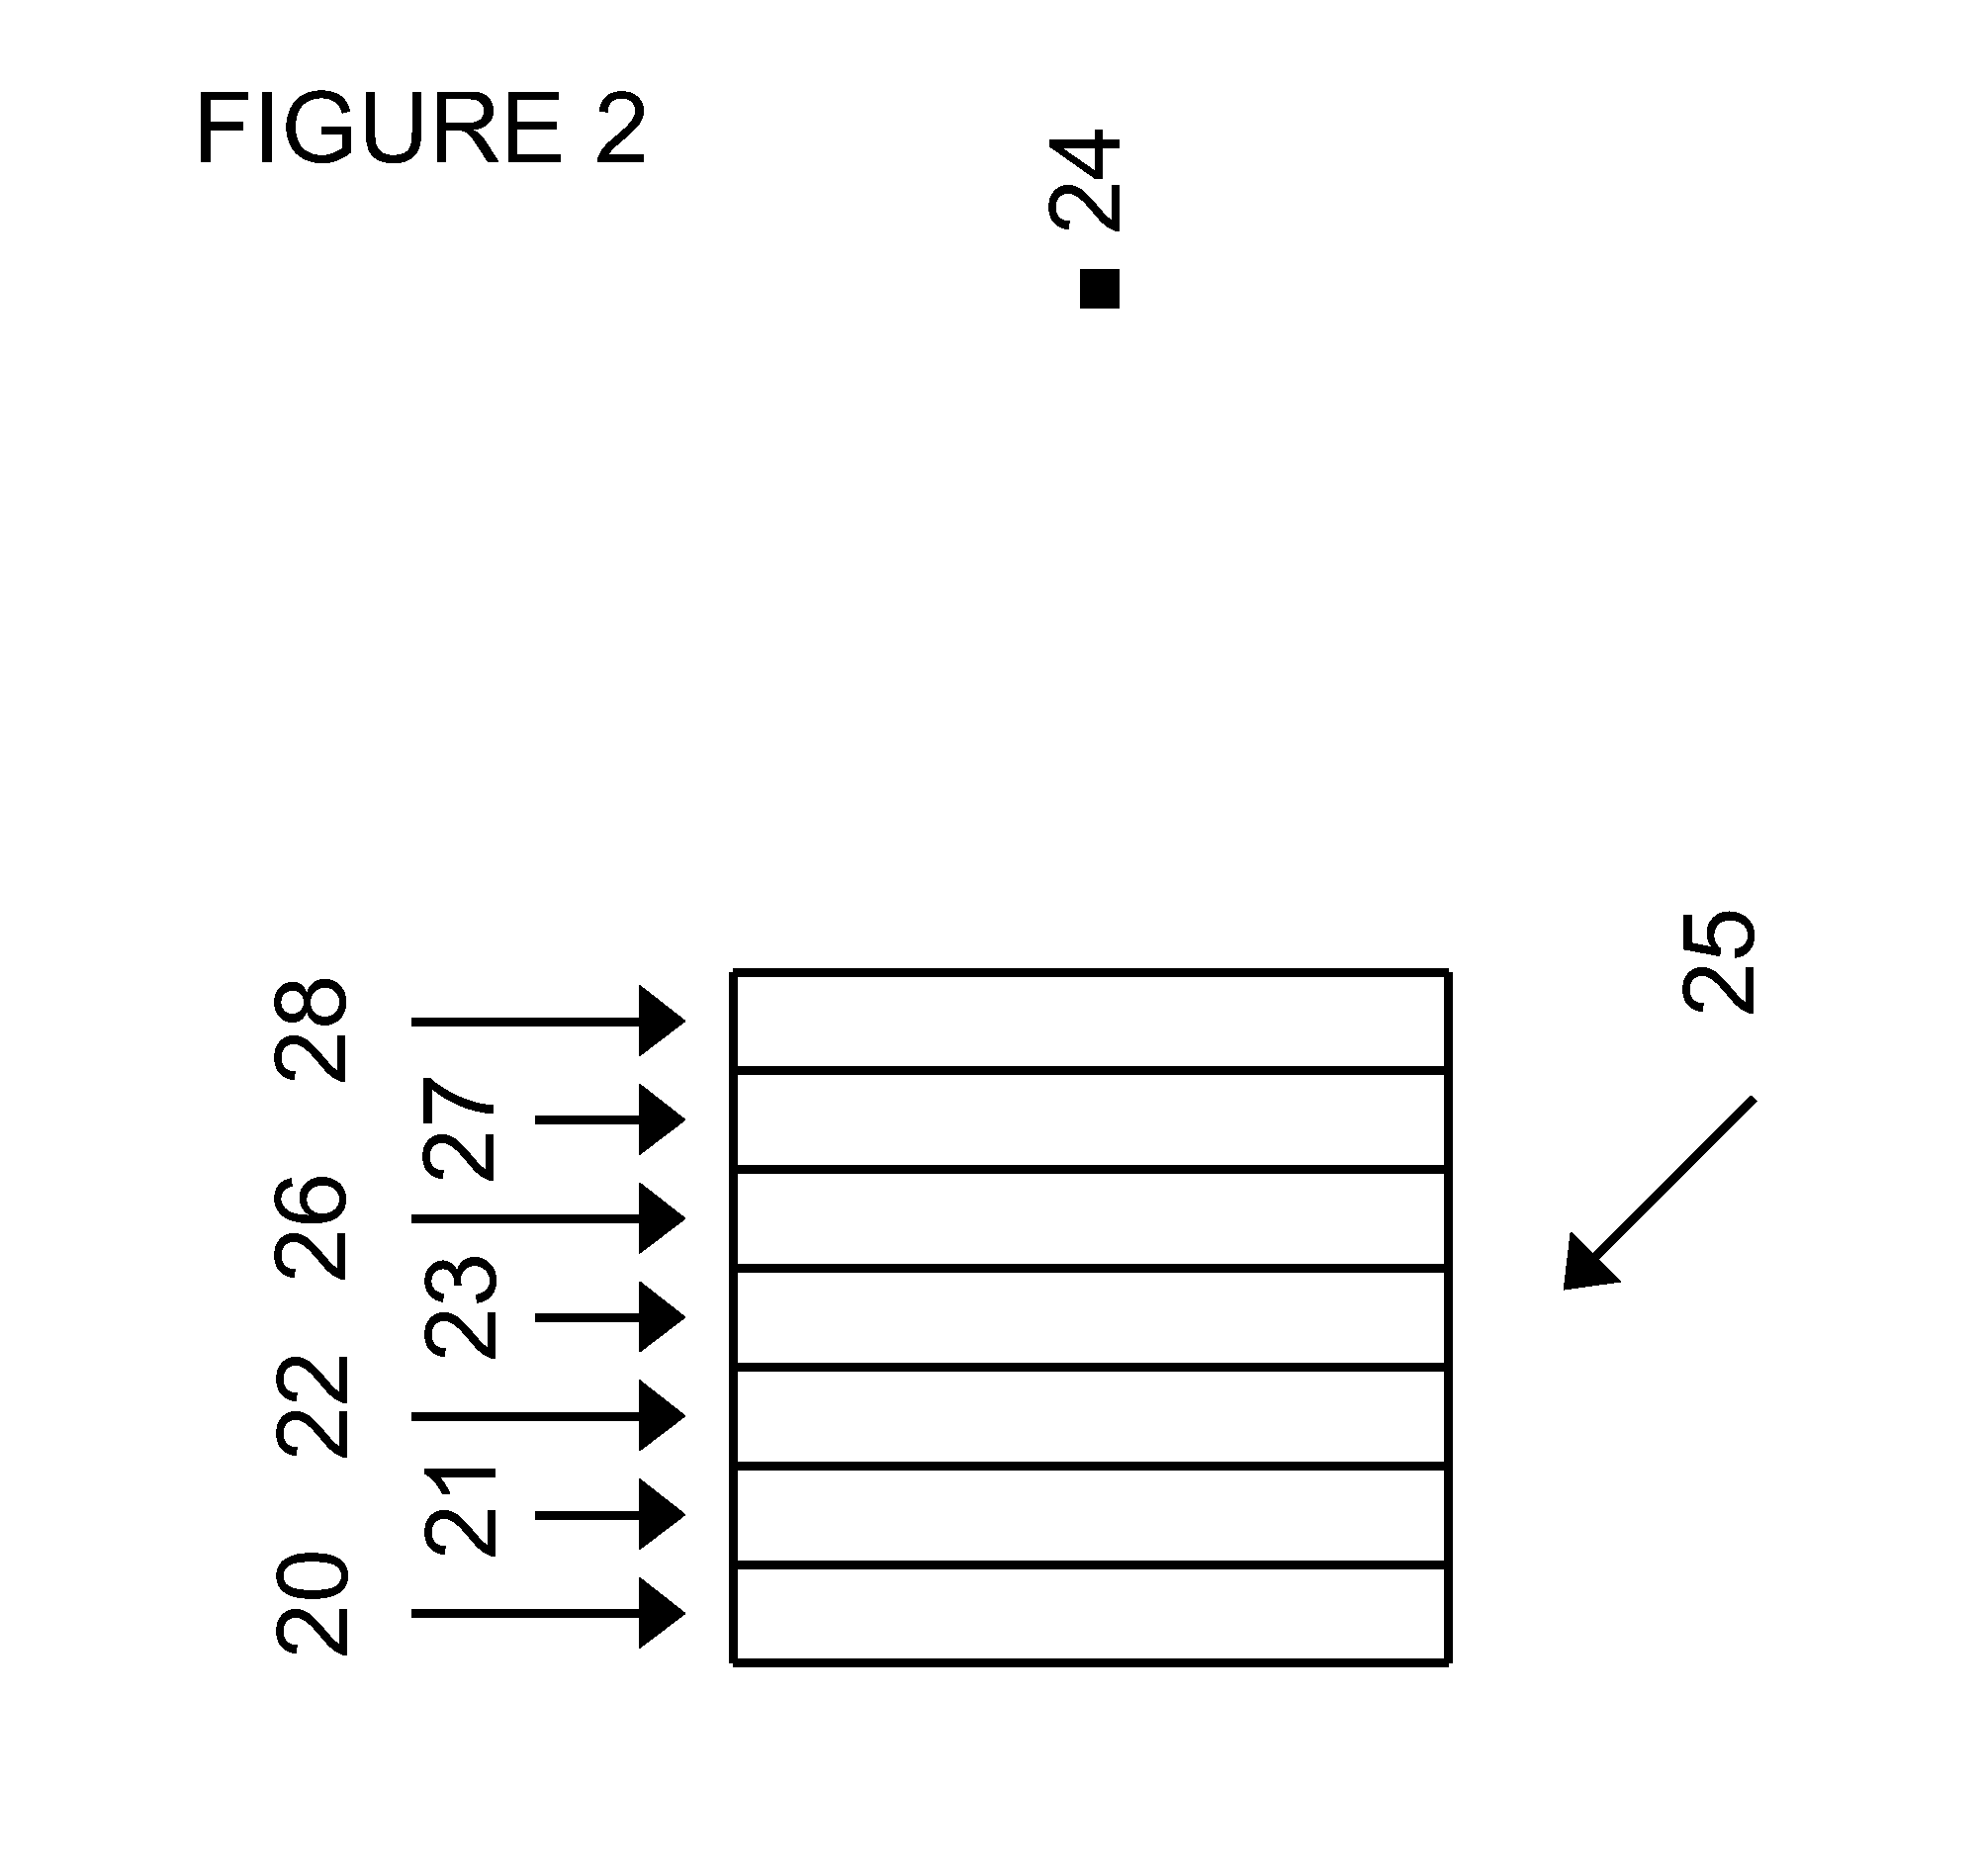 Holographic display device comprising magneto-optical spatial light modulator